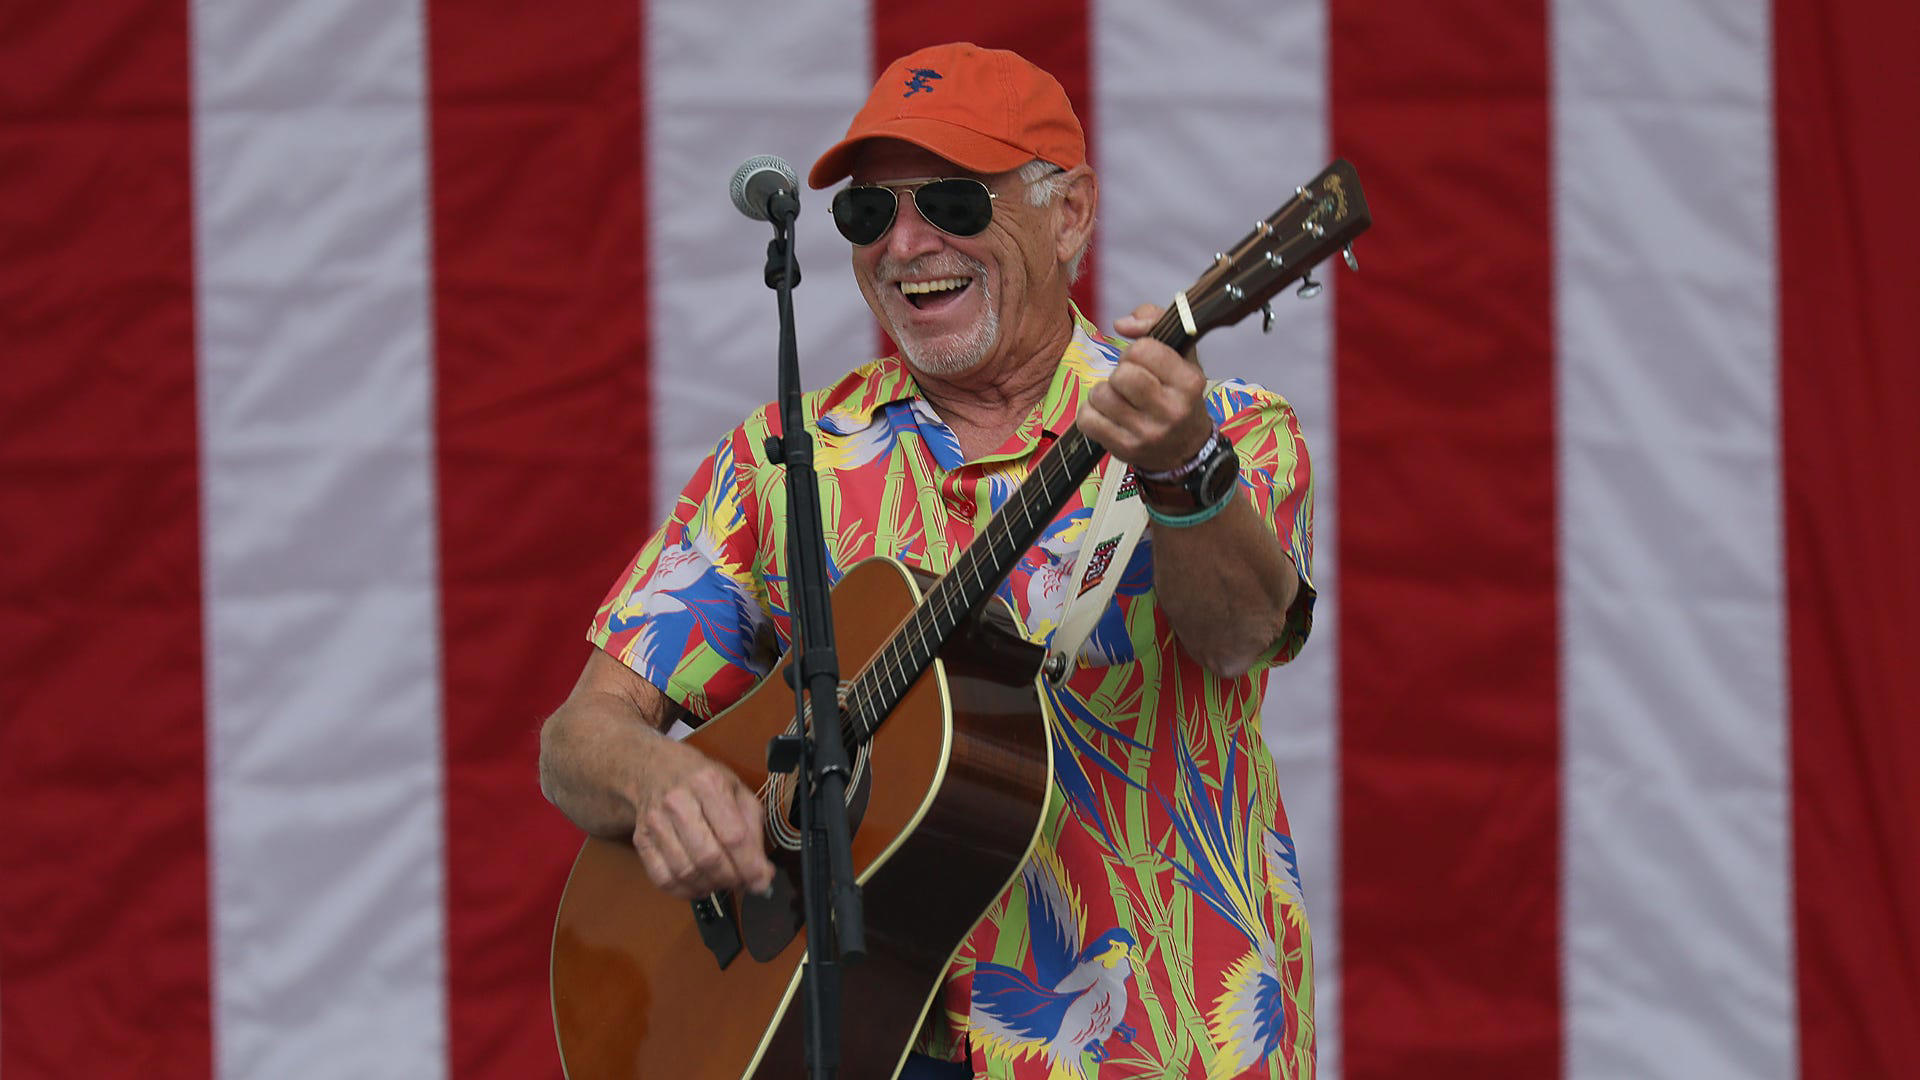 Jimmy Buffett will be honored with an allstar tribute at the 2023 CMA